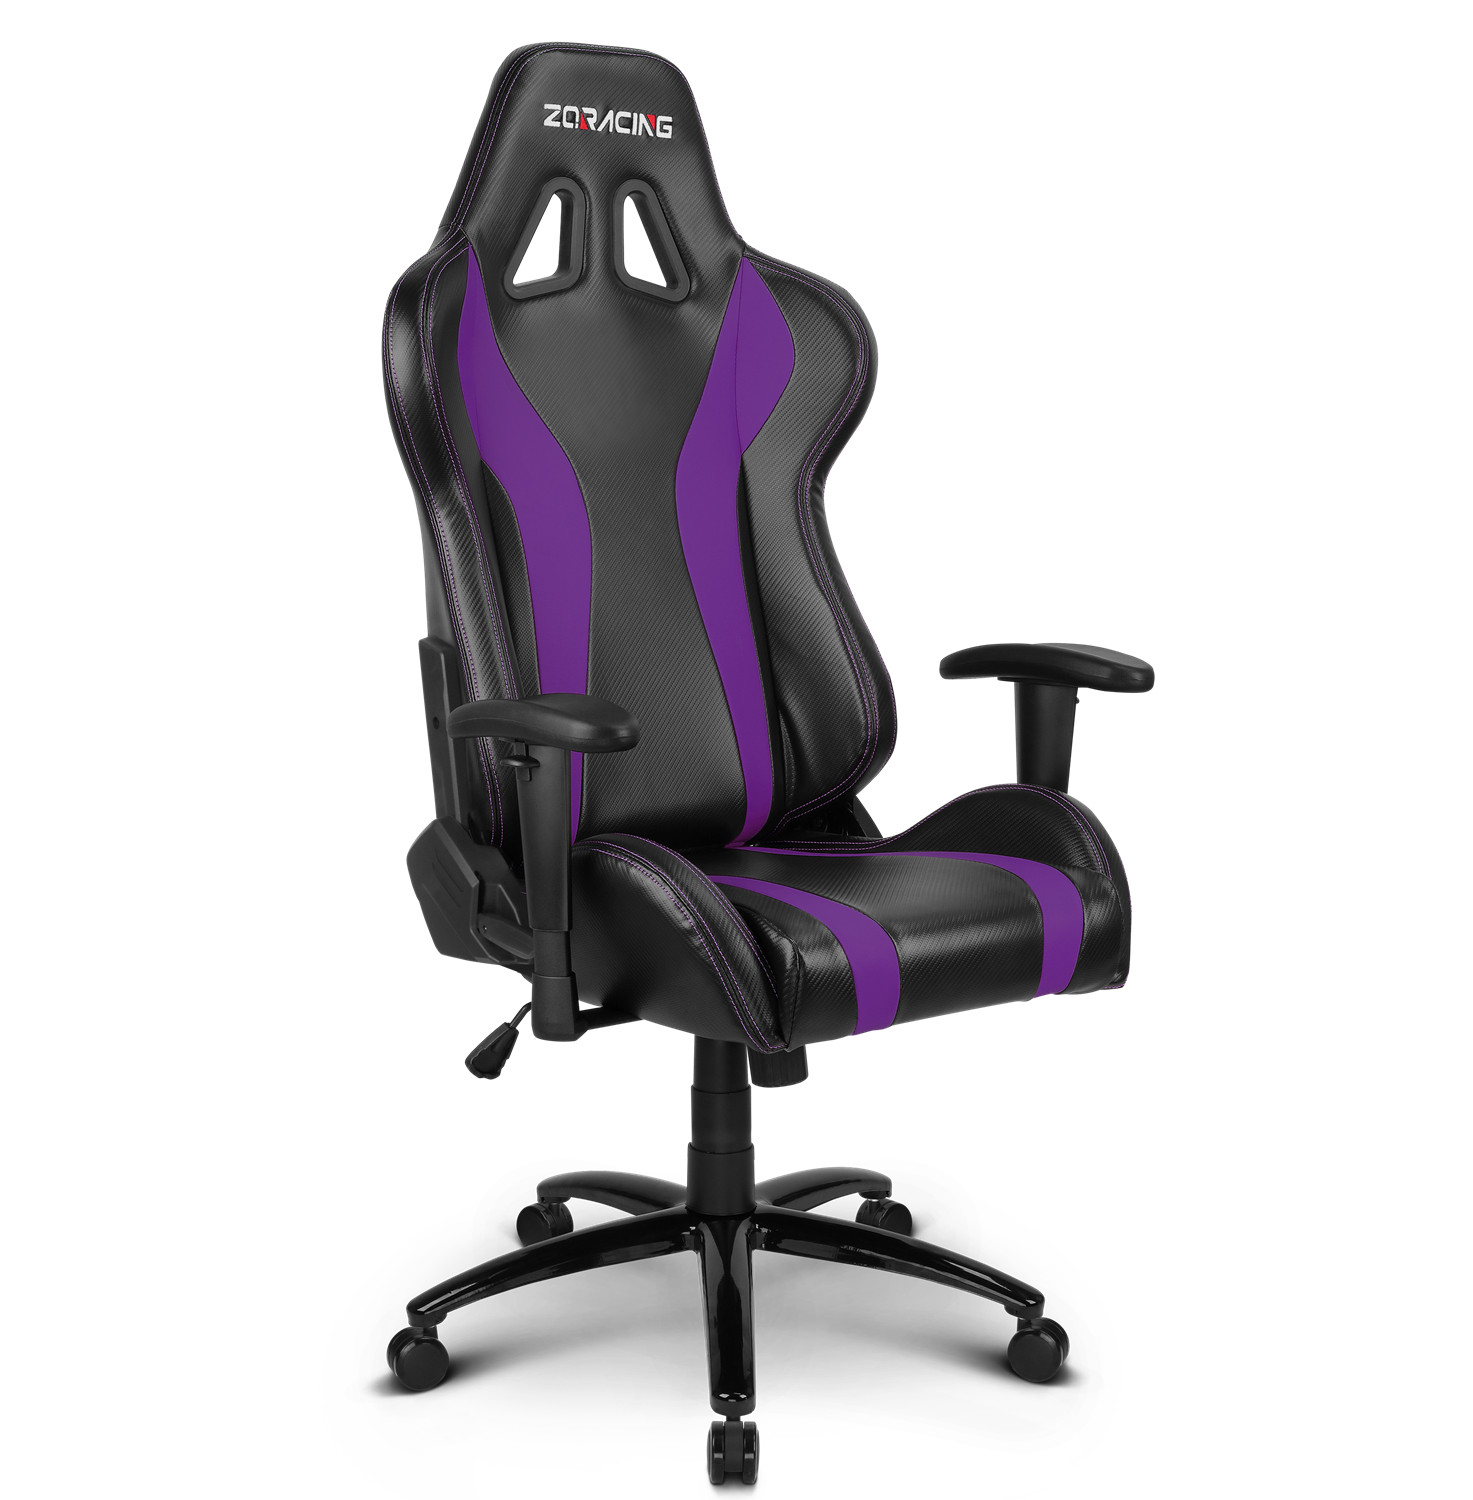 Zqracing V6 Racer Series Gaming Office Chair Purple Black Zqracing